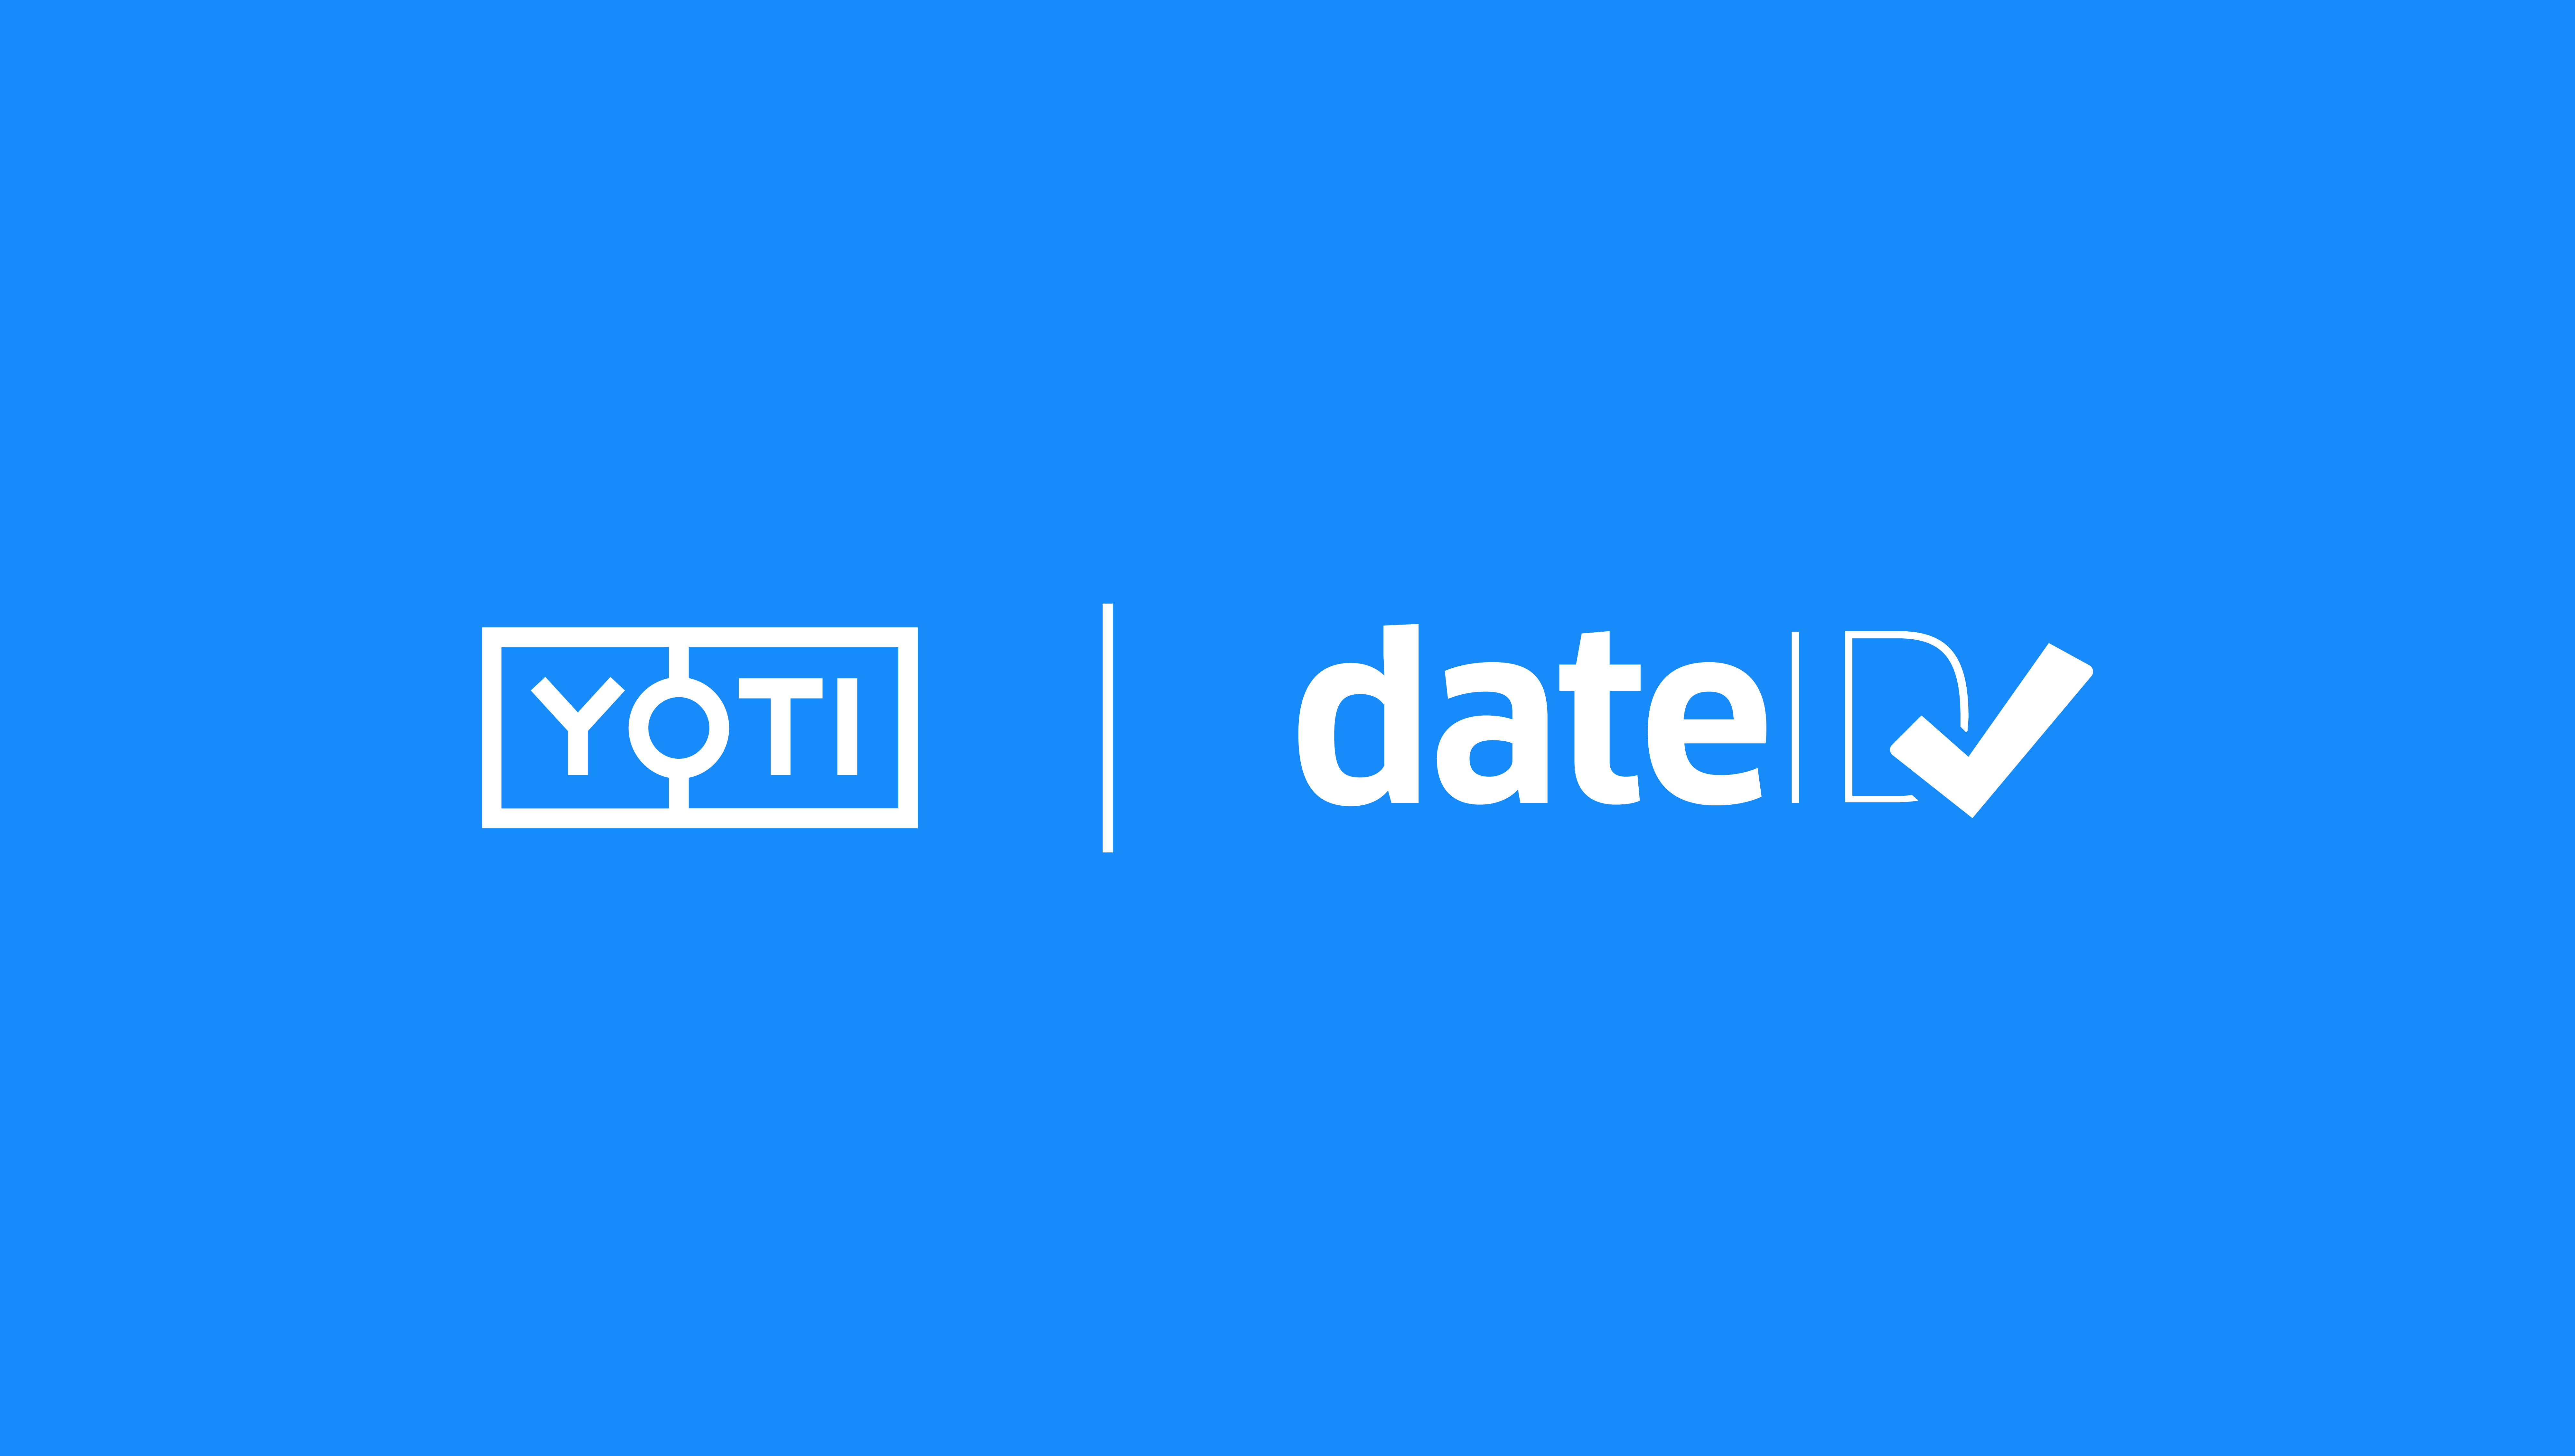 Yoti and DateID work together to create a safer community of verified online daters